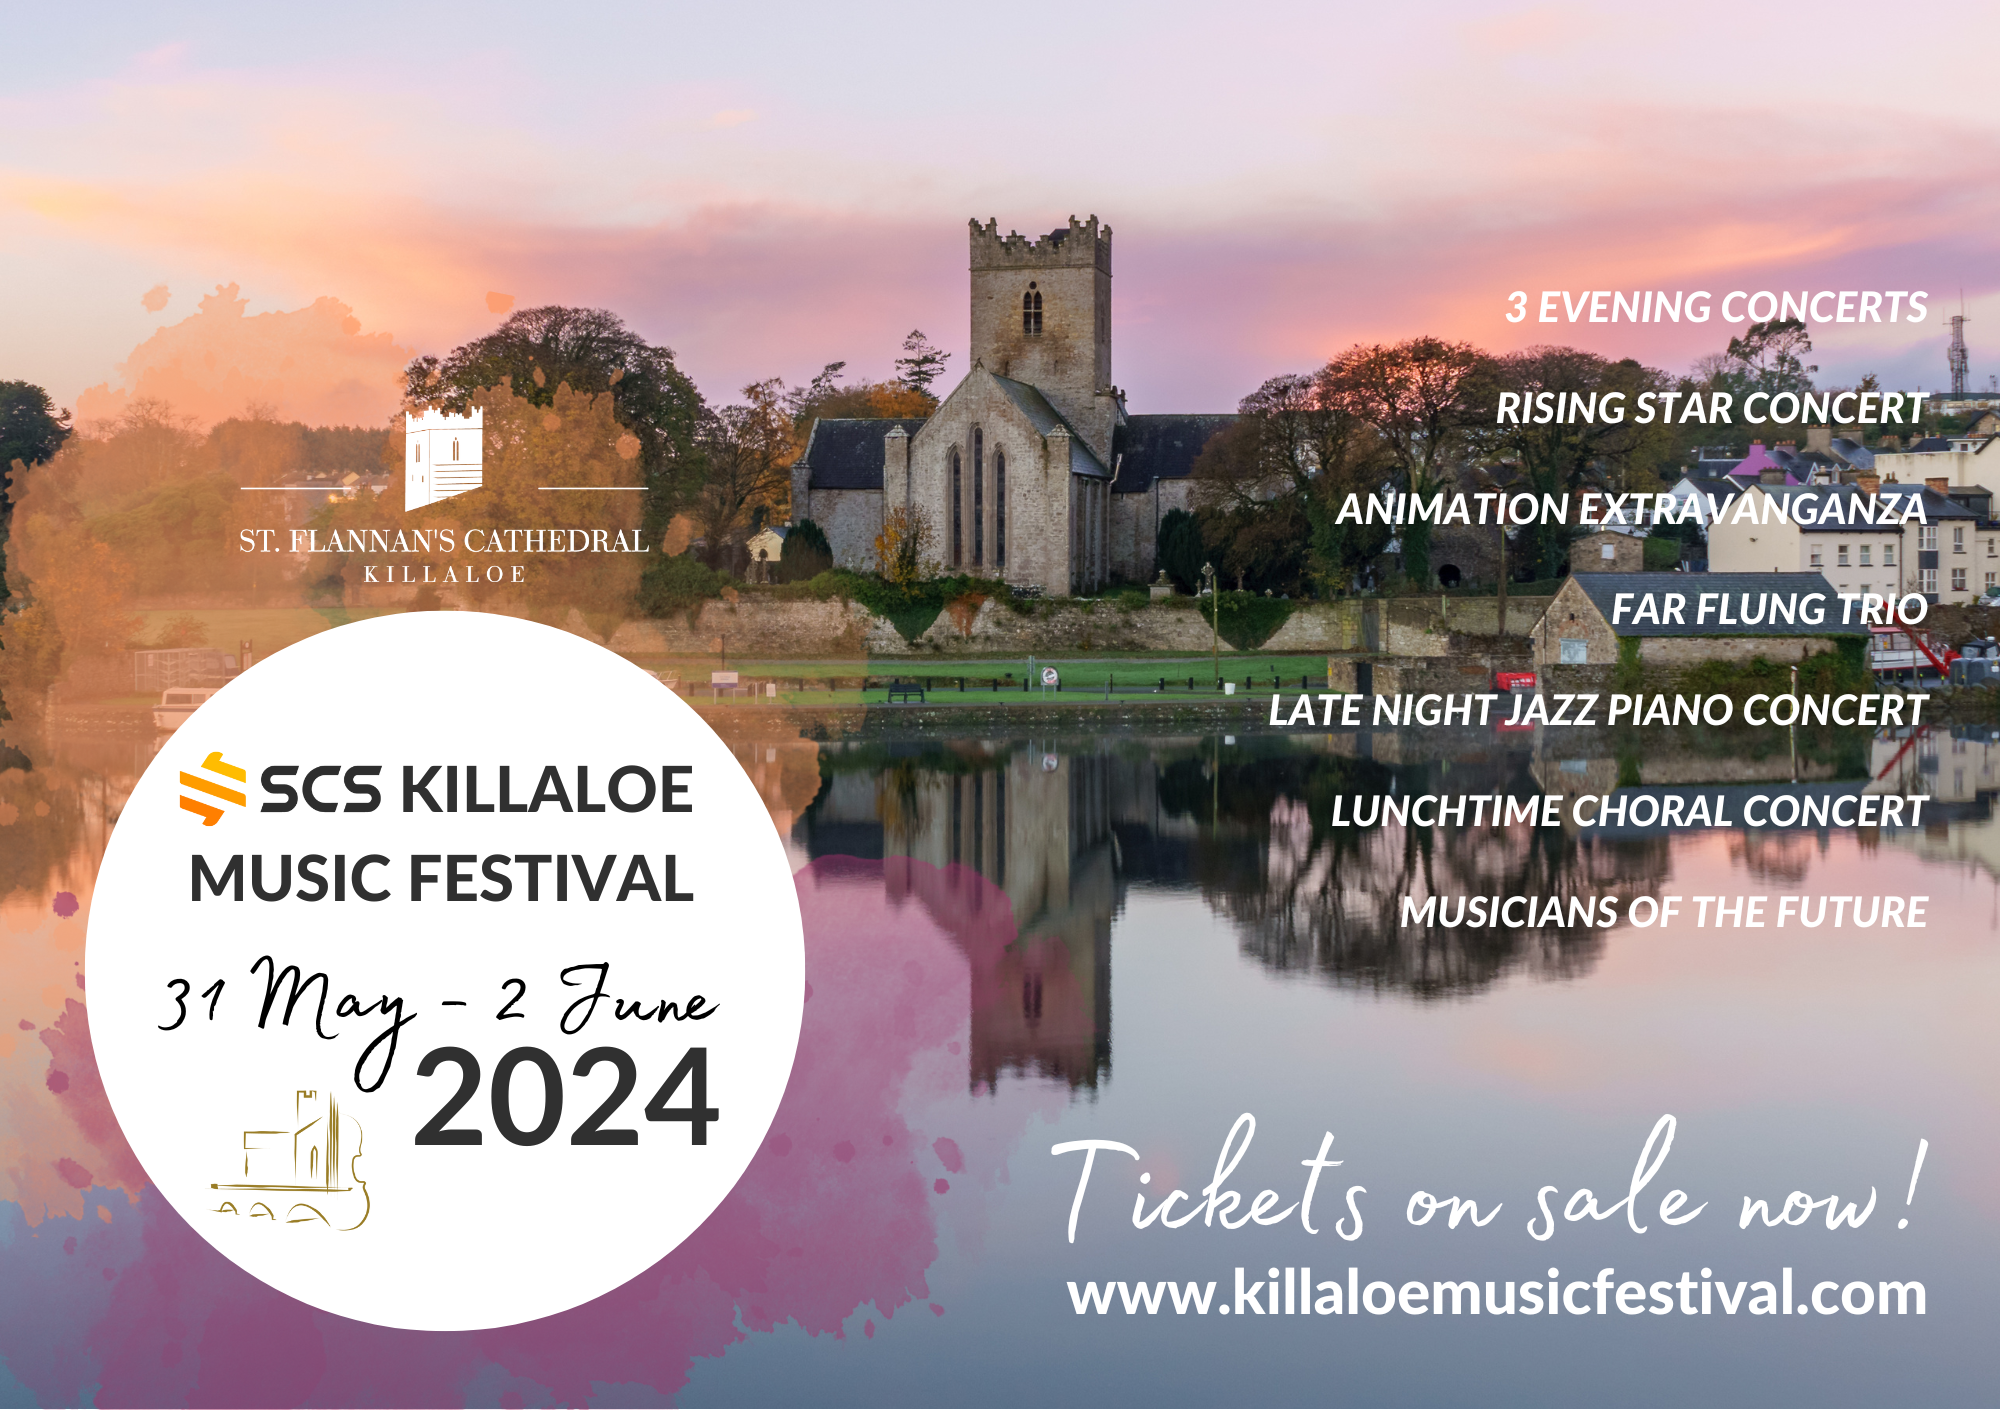 SCS Killaloe Music Festival - Lunchtime Choral Concert